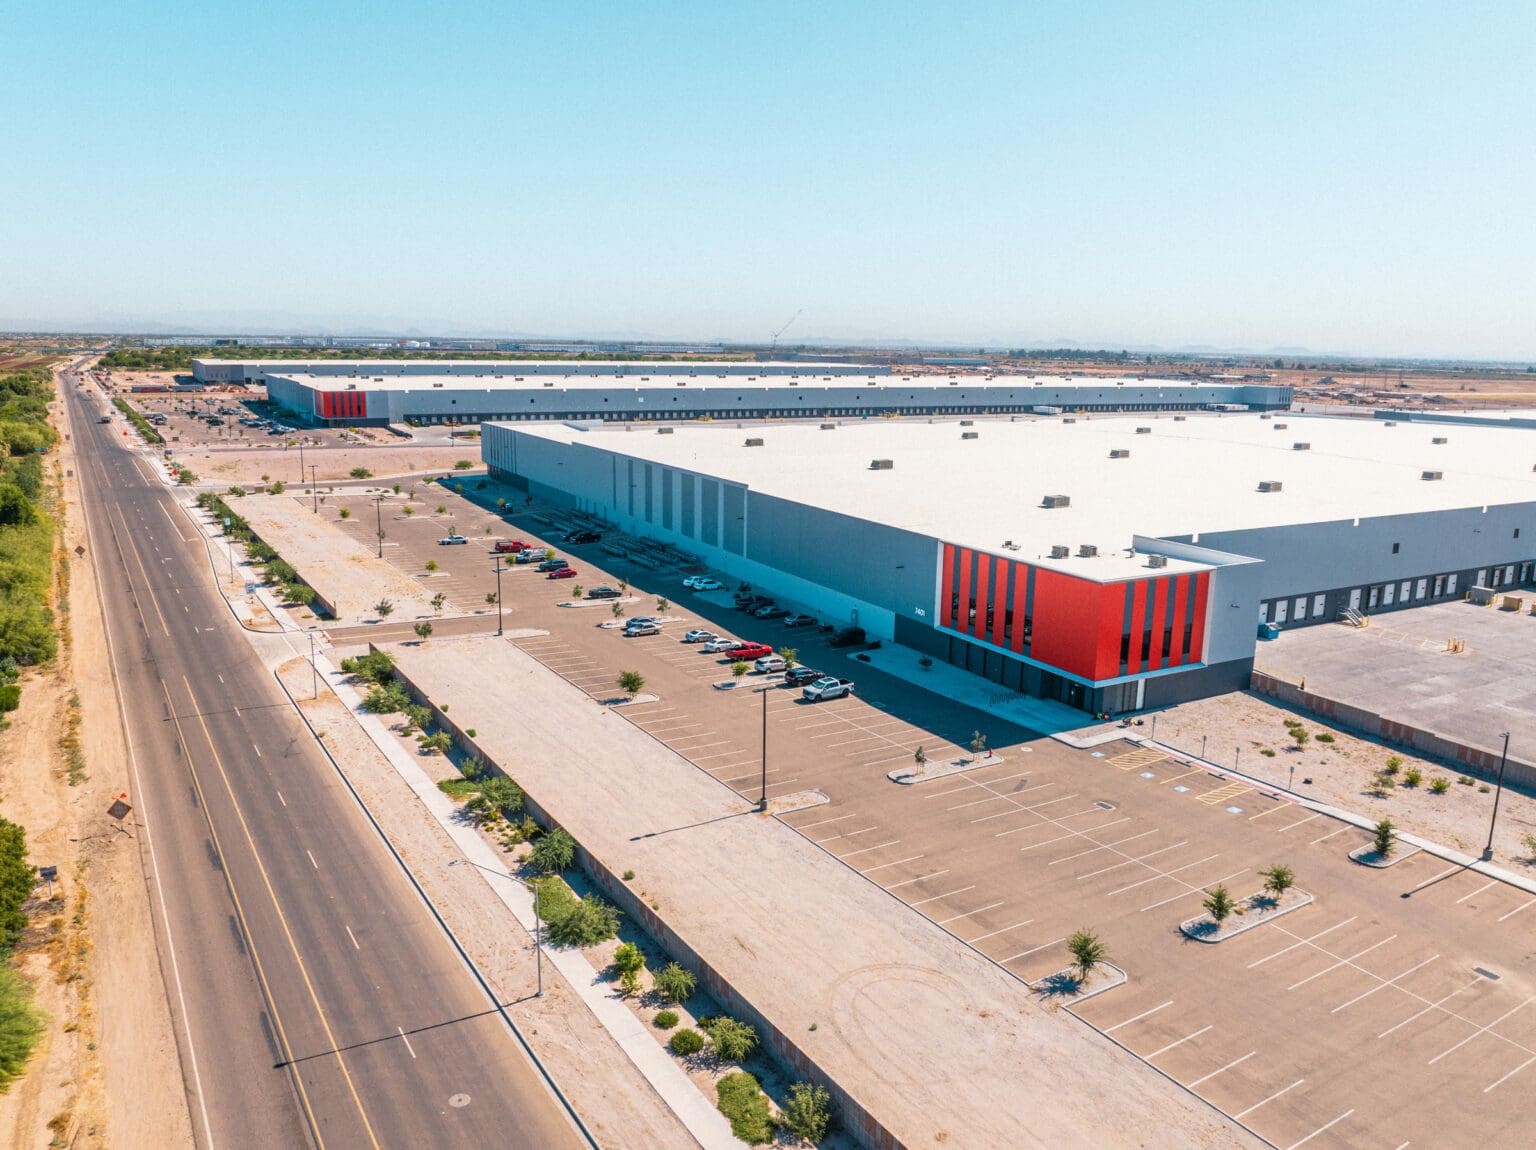 Aerial view of large industrial warehouses with orange accents, adjacent parking lots, and a K2 Electric service road beside them under a clear blue sky.